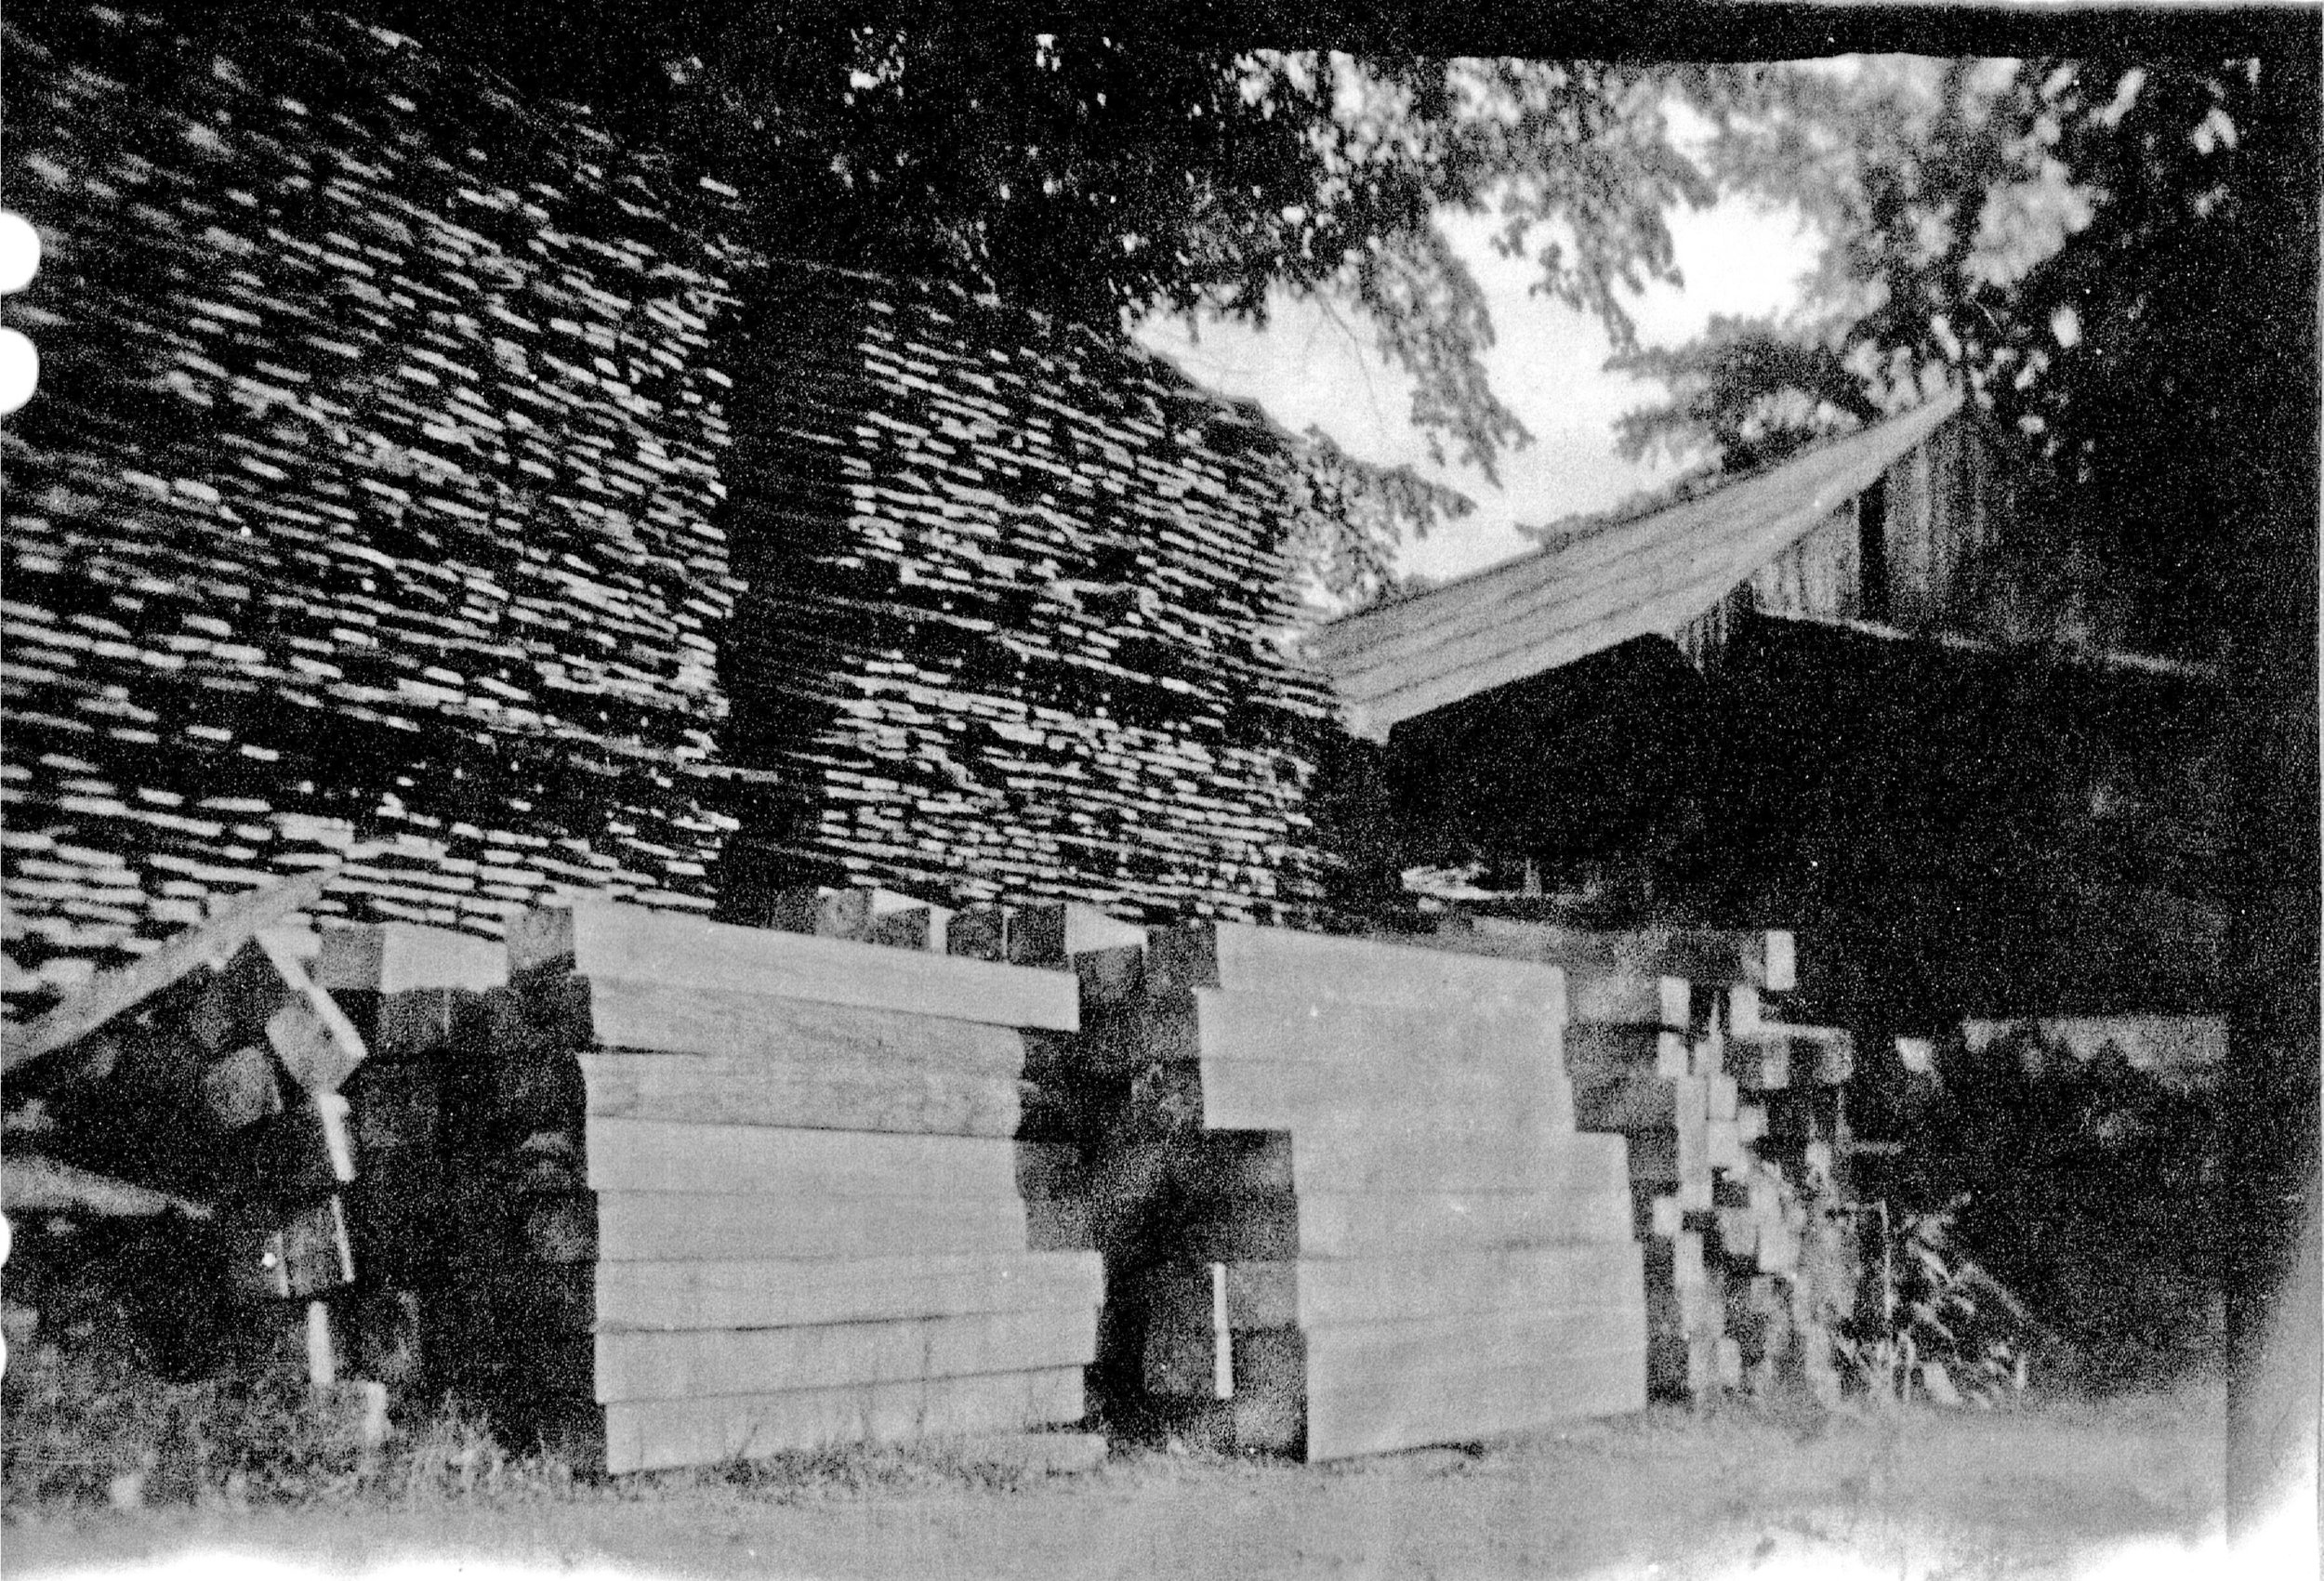 Historic photograph of lumber produced at the Robinson Sawmill.